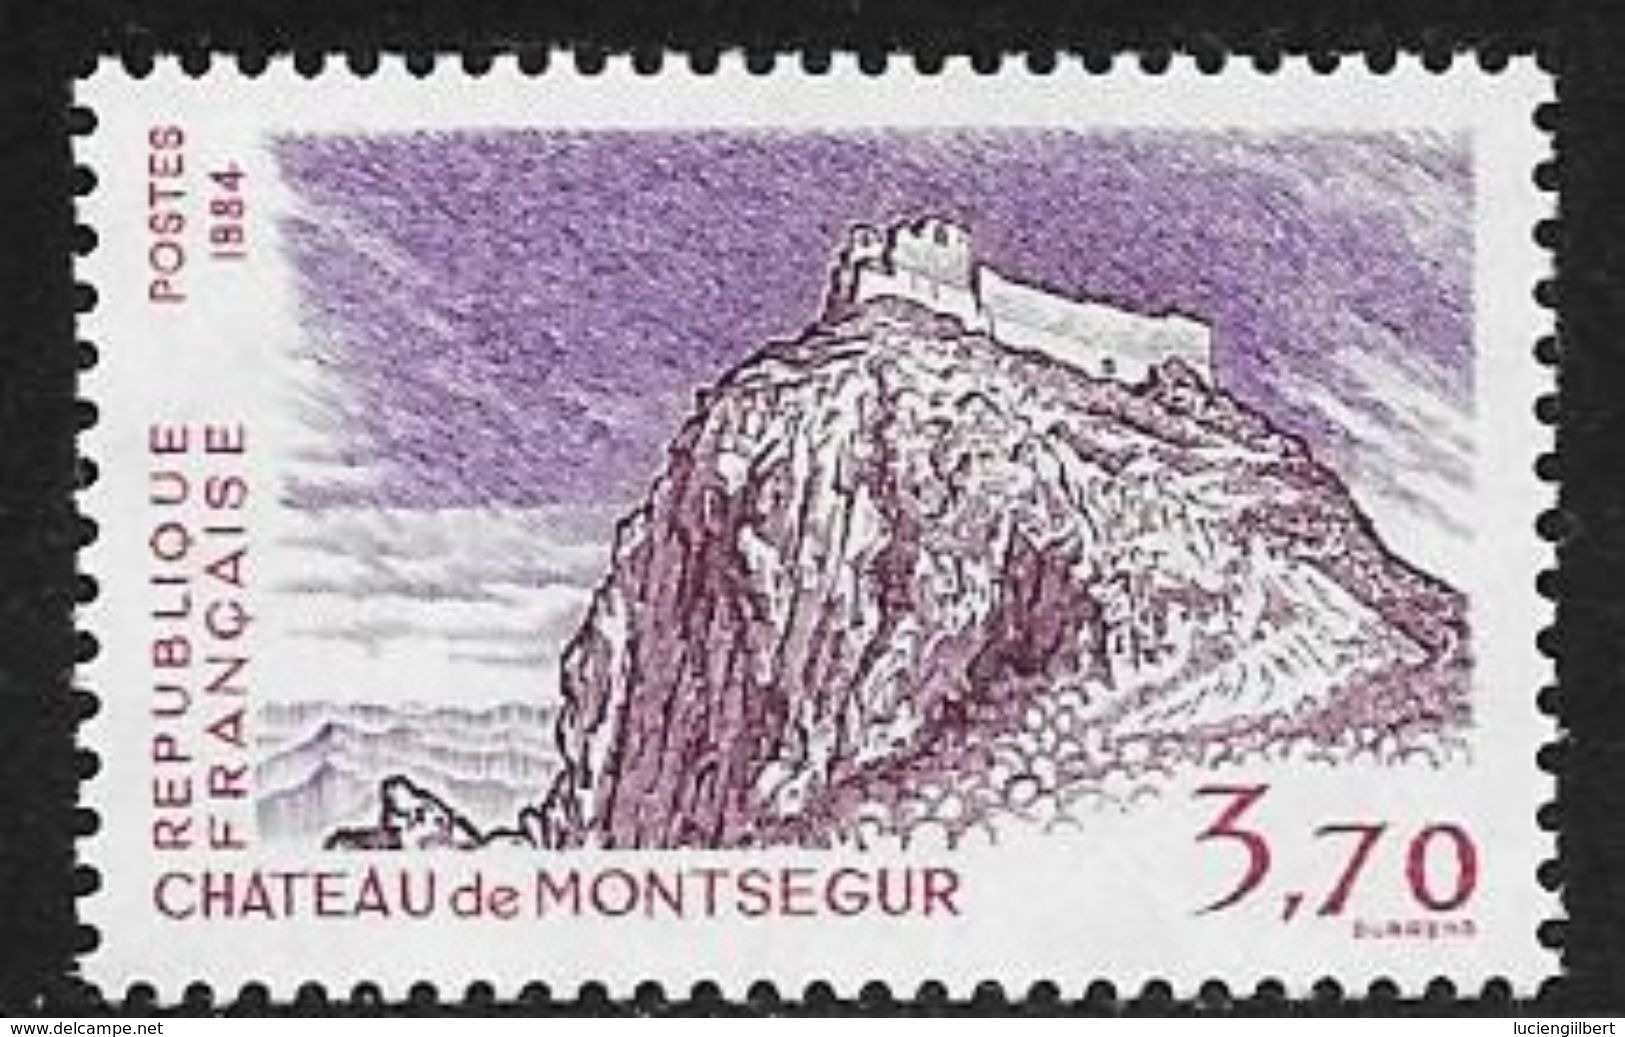 TIMBRE N° 2335   FRANCE - NEUF -   CHATEAU DE MONTSEGUR  -  1984 - Unused Stamps